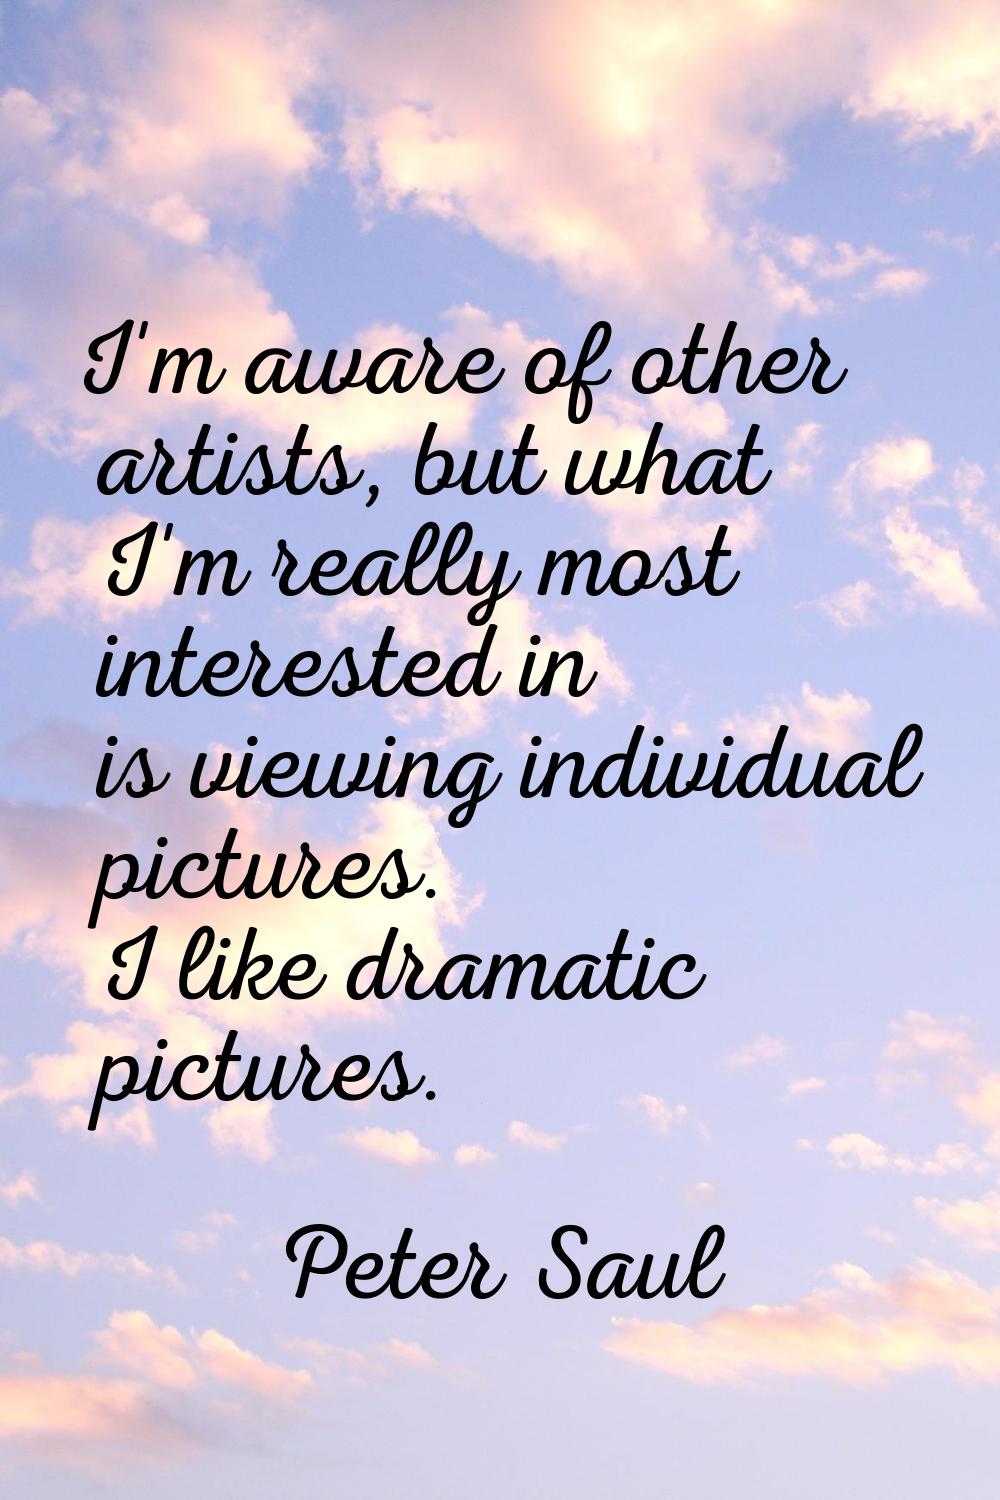 I'm aware of other artists, but what I'm really most interested in is viewing individual pictures. 